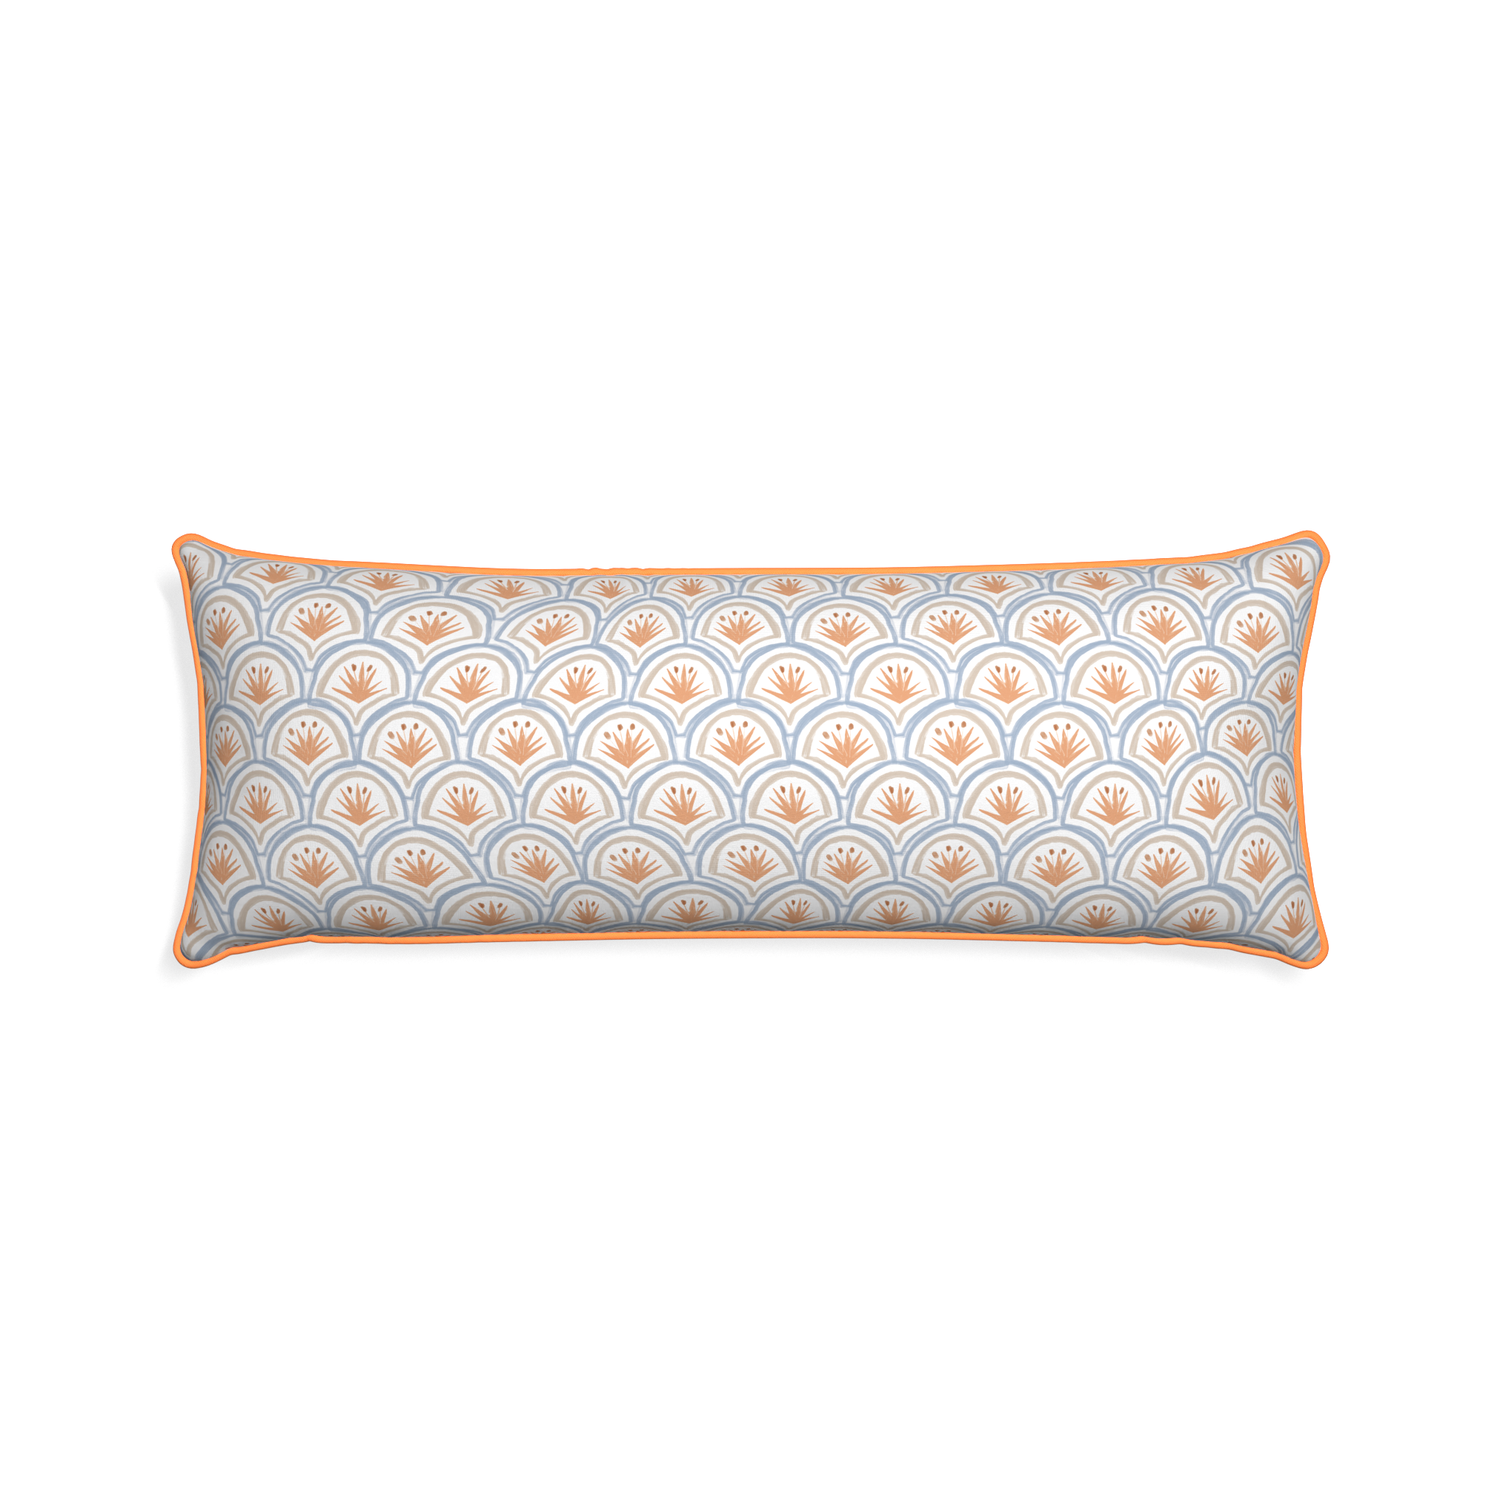 Xl-lumbar thatcher apricot custom pillow with clementine piping on white background